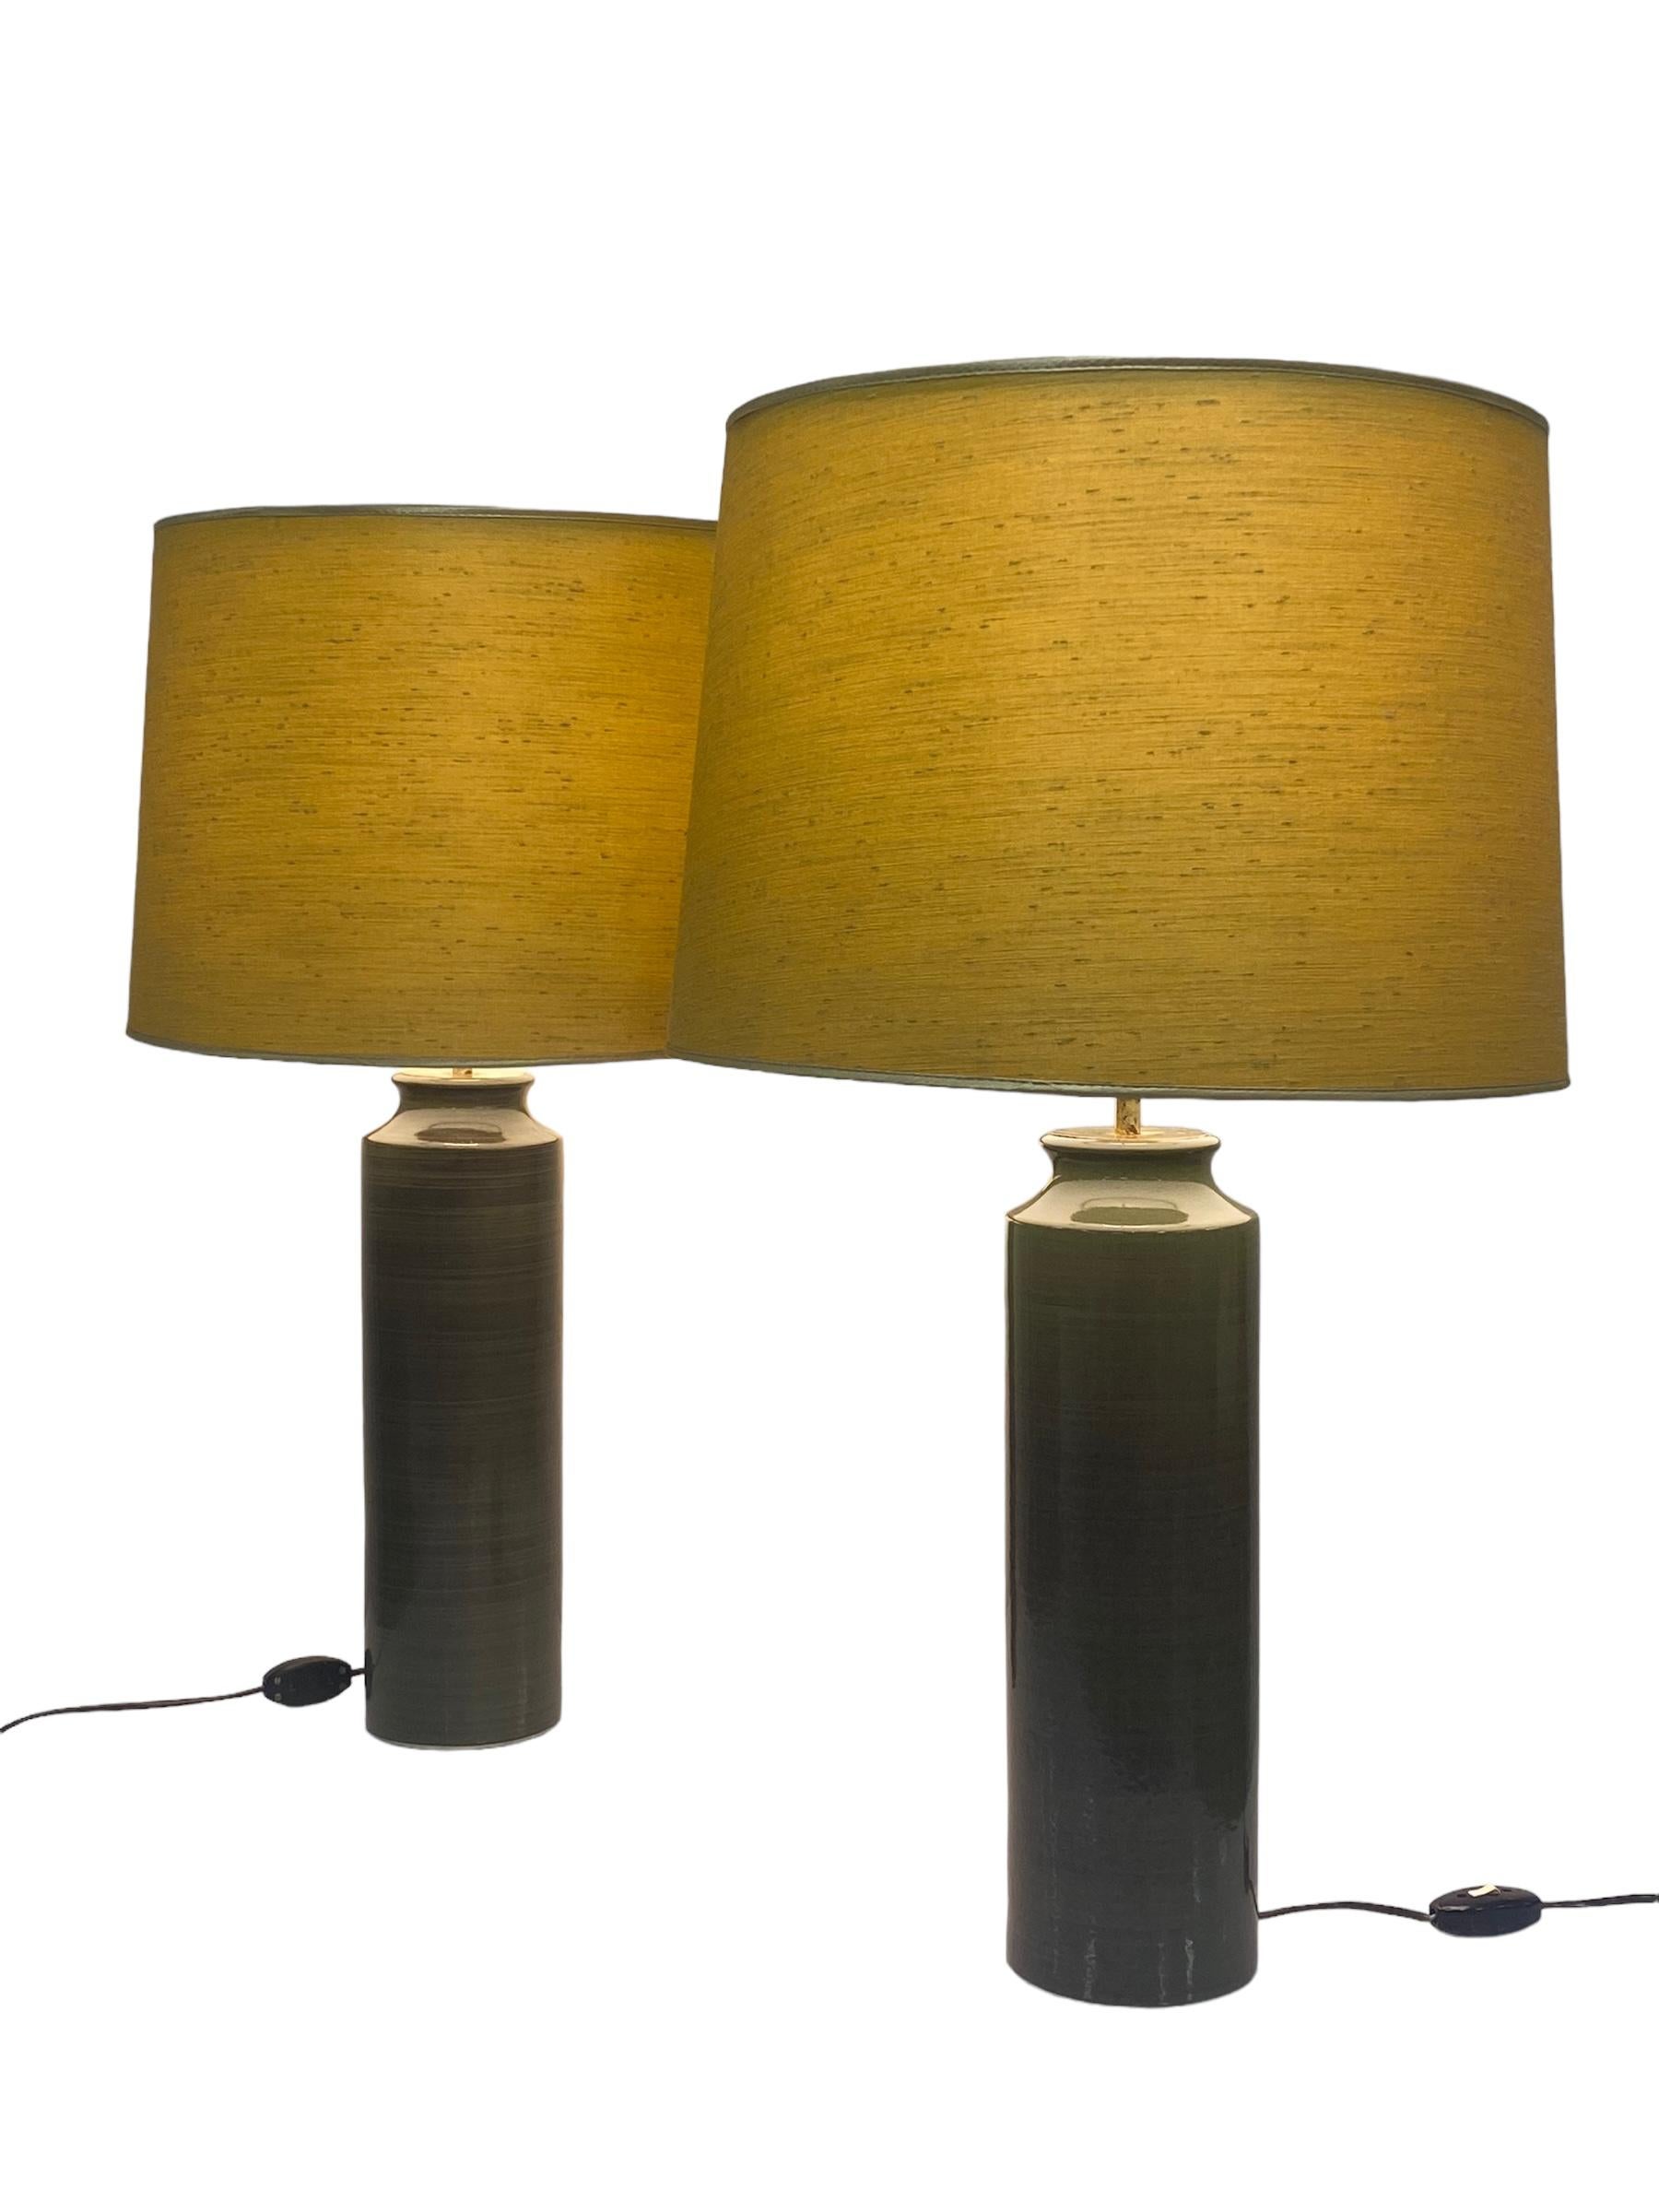 Pair of majestic table lamps designed by Gunvor Olin-Grönqvist for Arabia in the 1950s. The lamps are very big and distinct. Featuring a greenish ceramic leg and yellow fabric shades. Both lamps are marked 